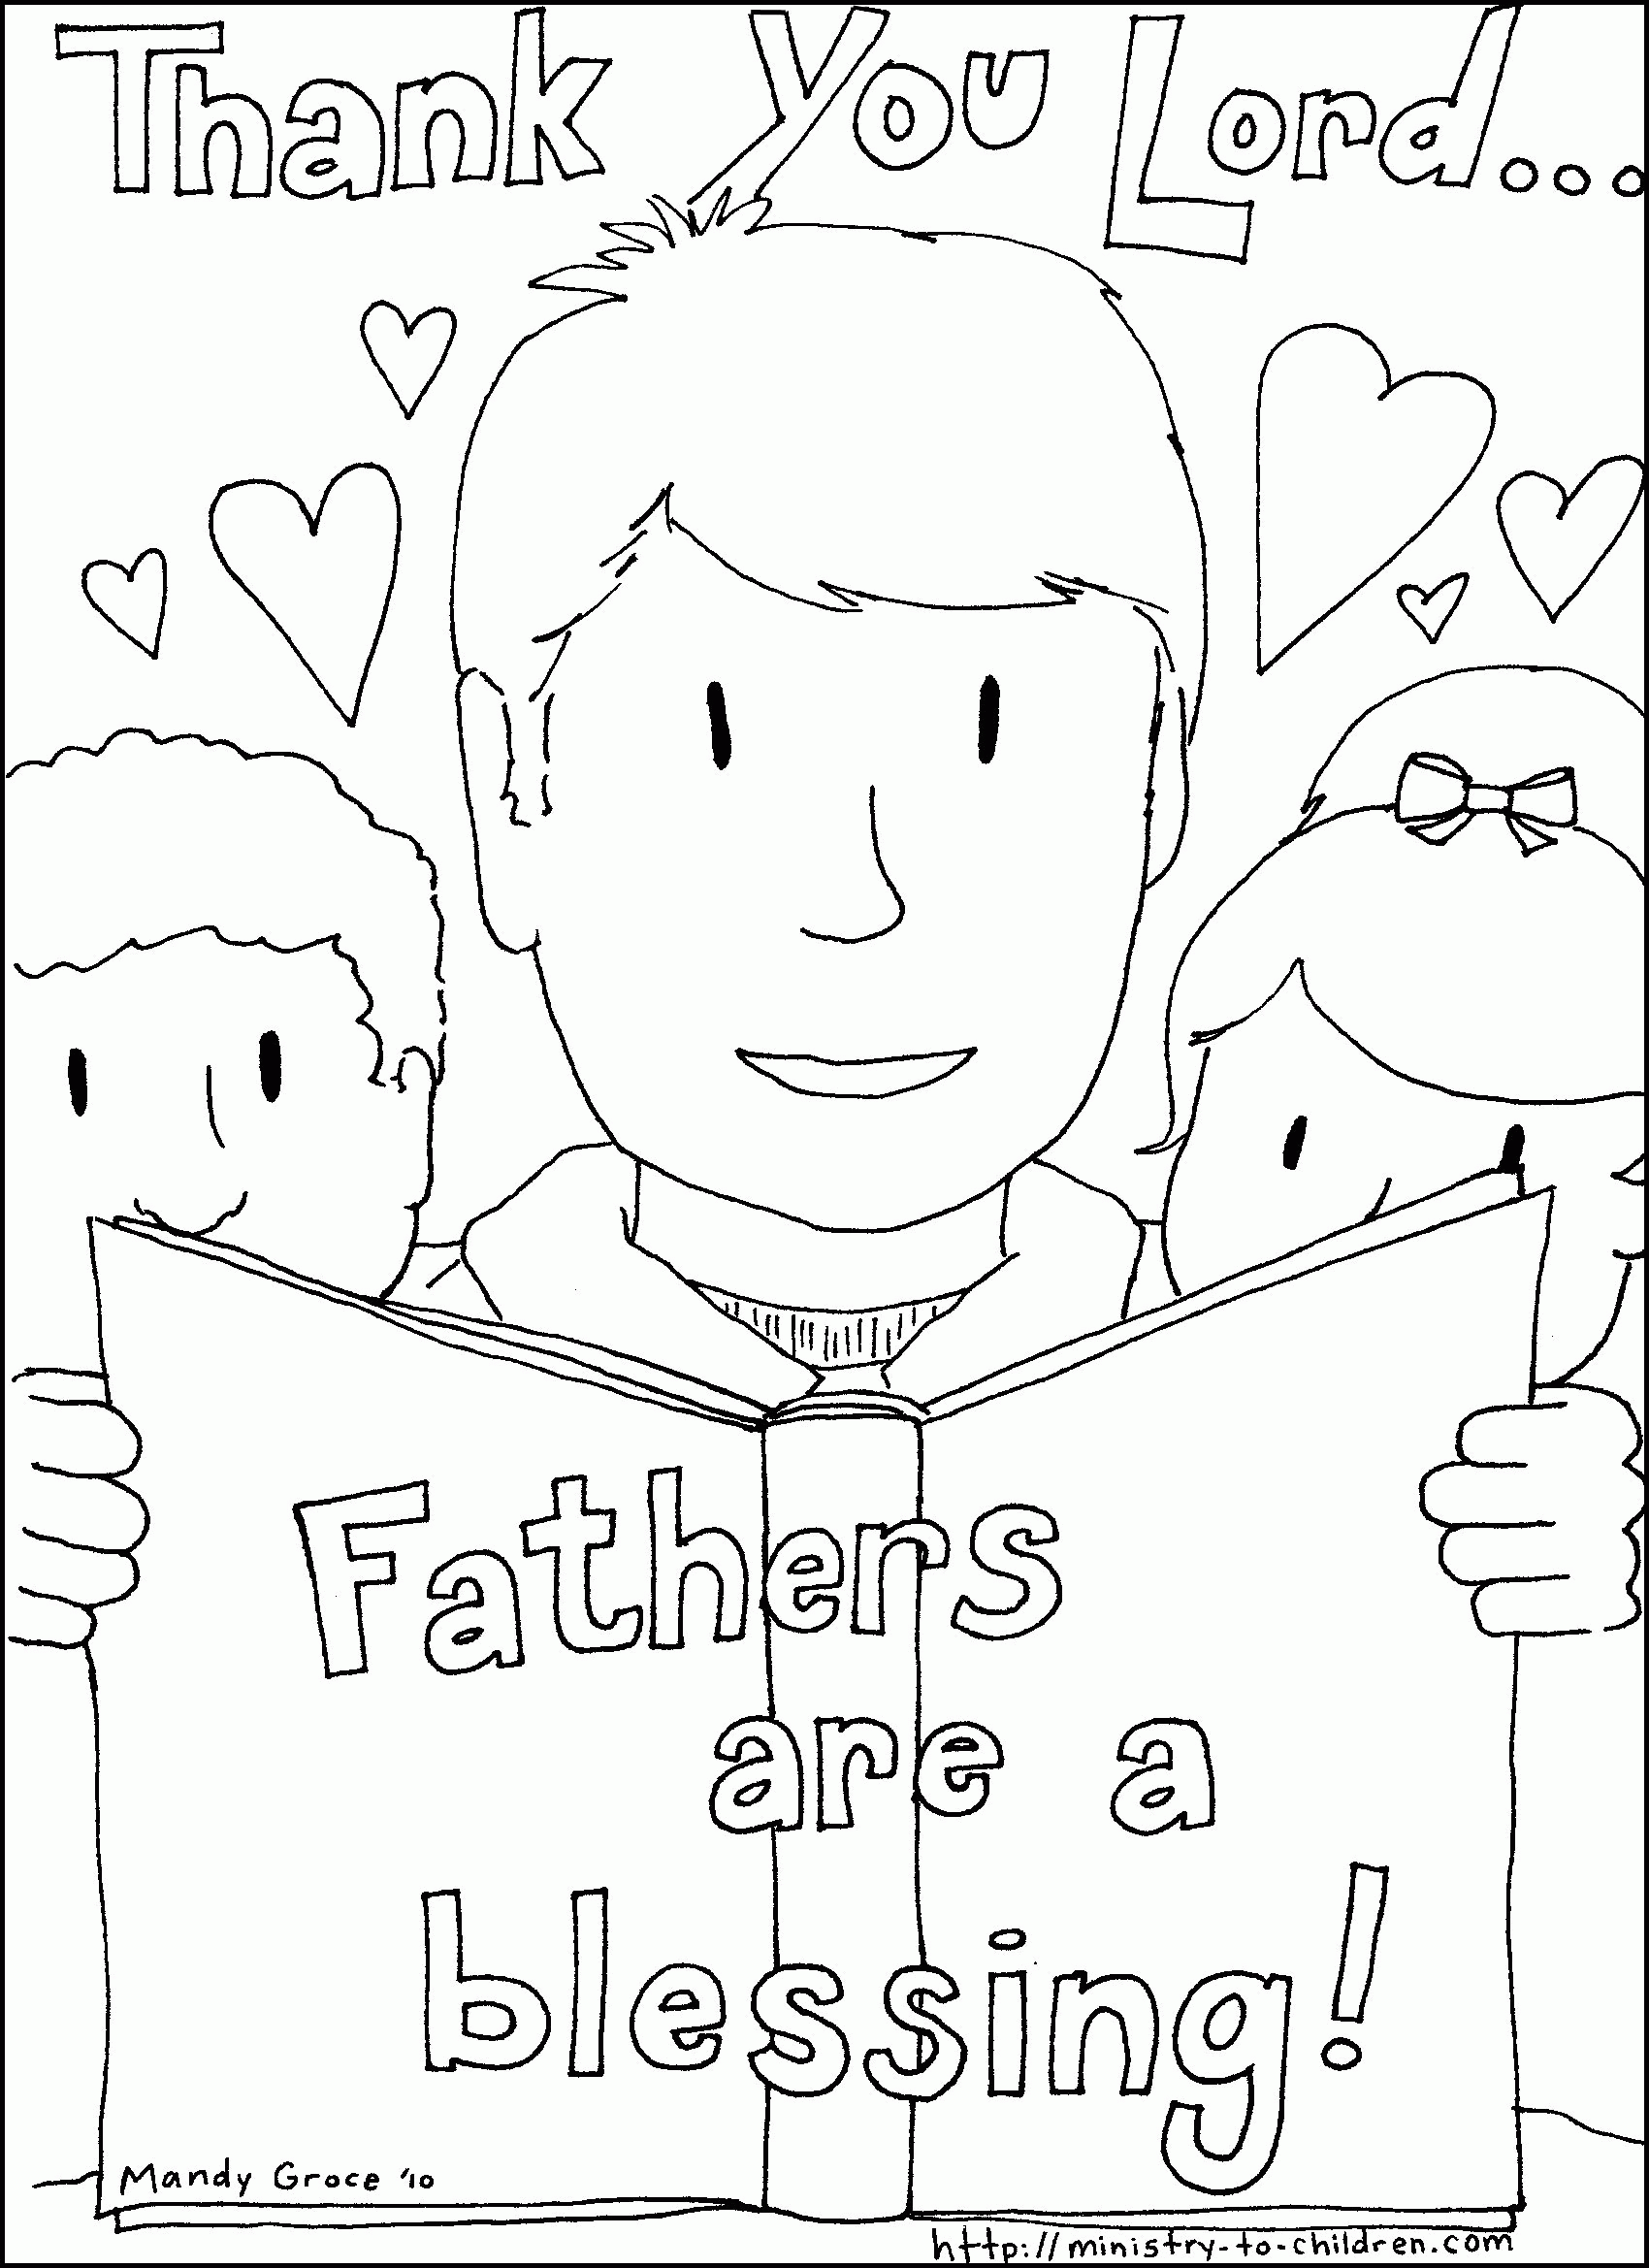 Happy Fathers Day Coloring Page - Coloring Home